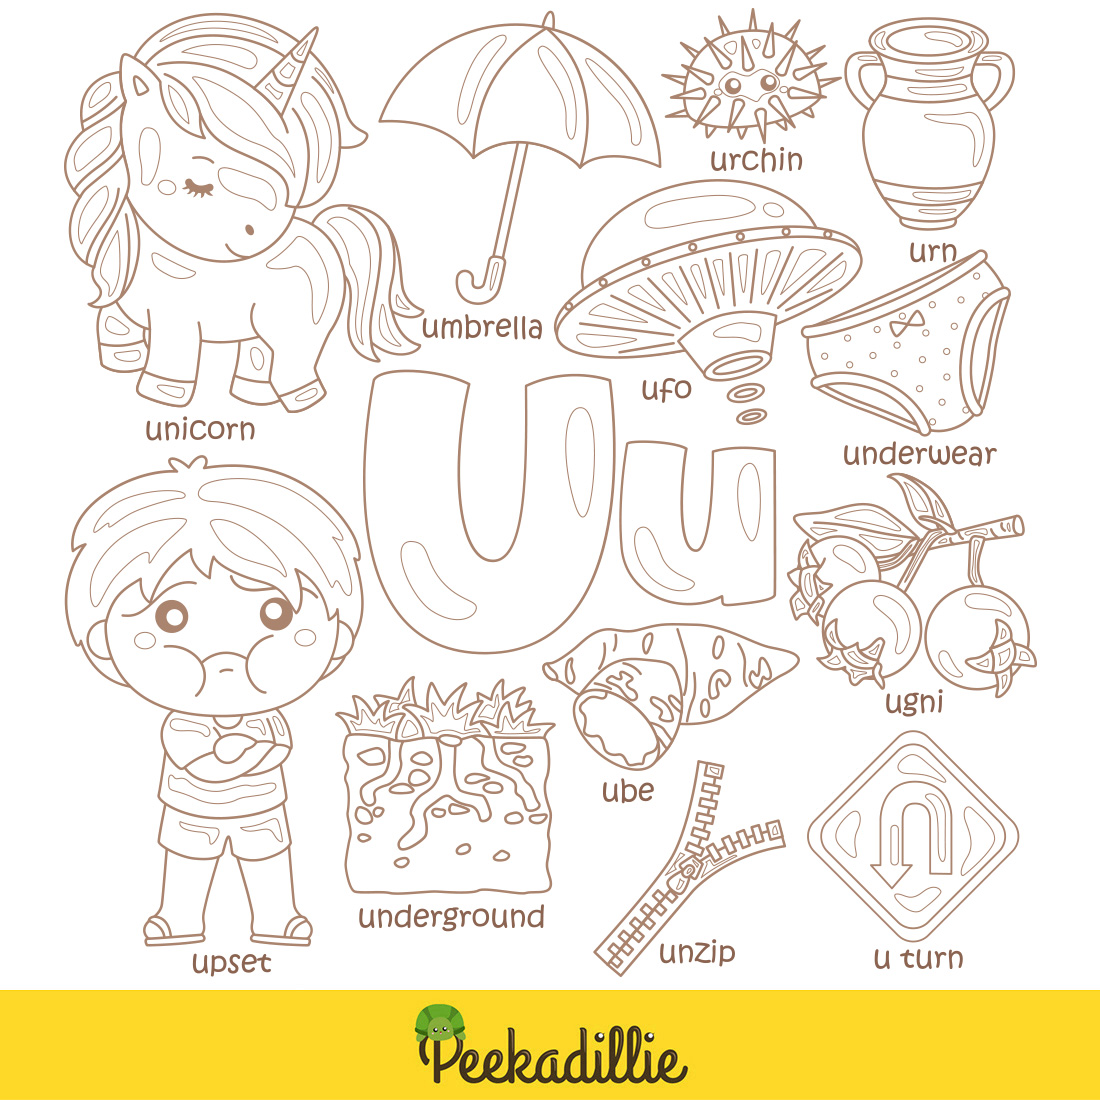 Premium Vector  Alphabet u for underwear vocabulary school lesson cartoon  coloring pages for kids and adult activity